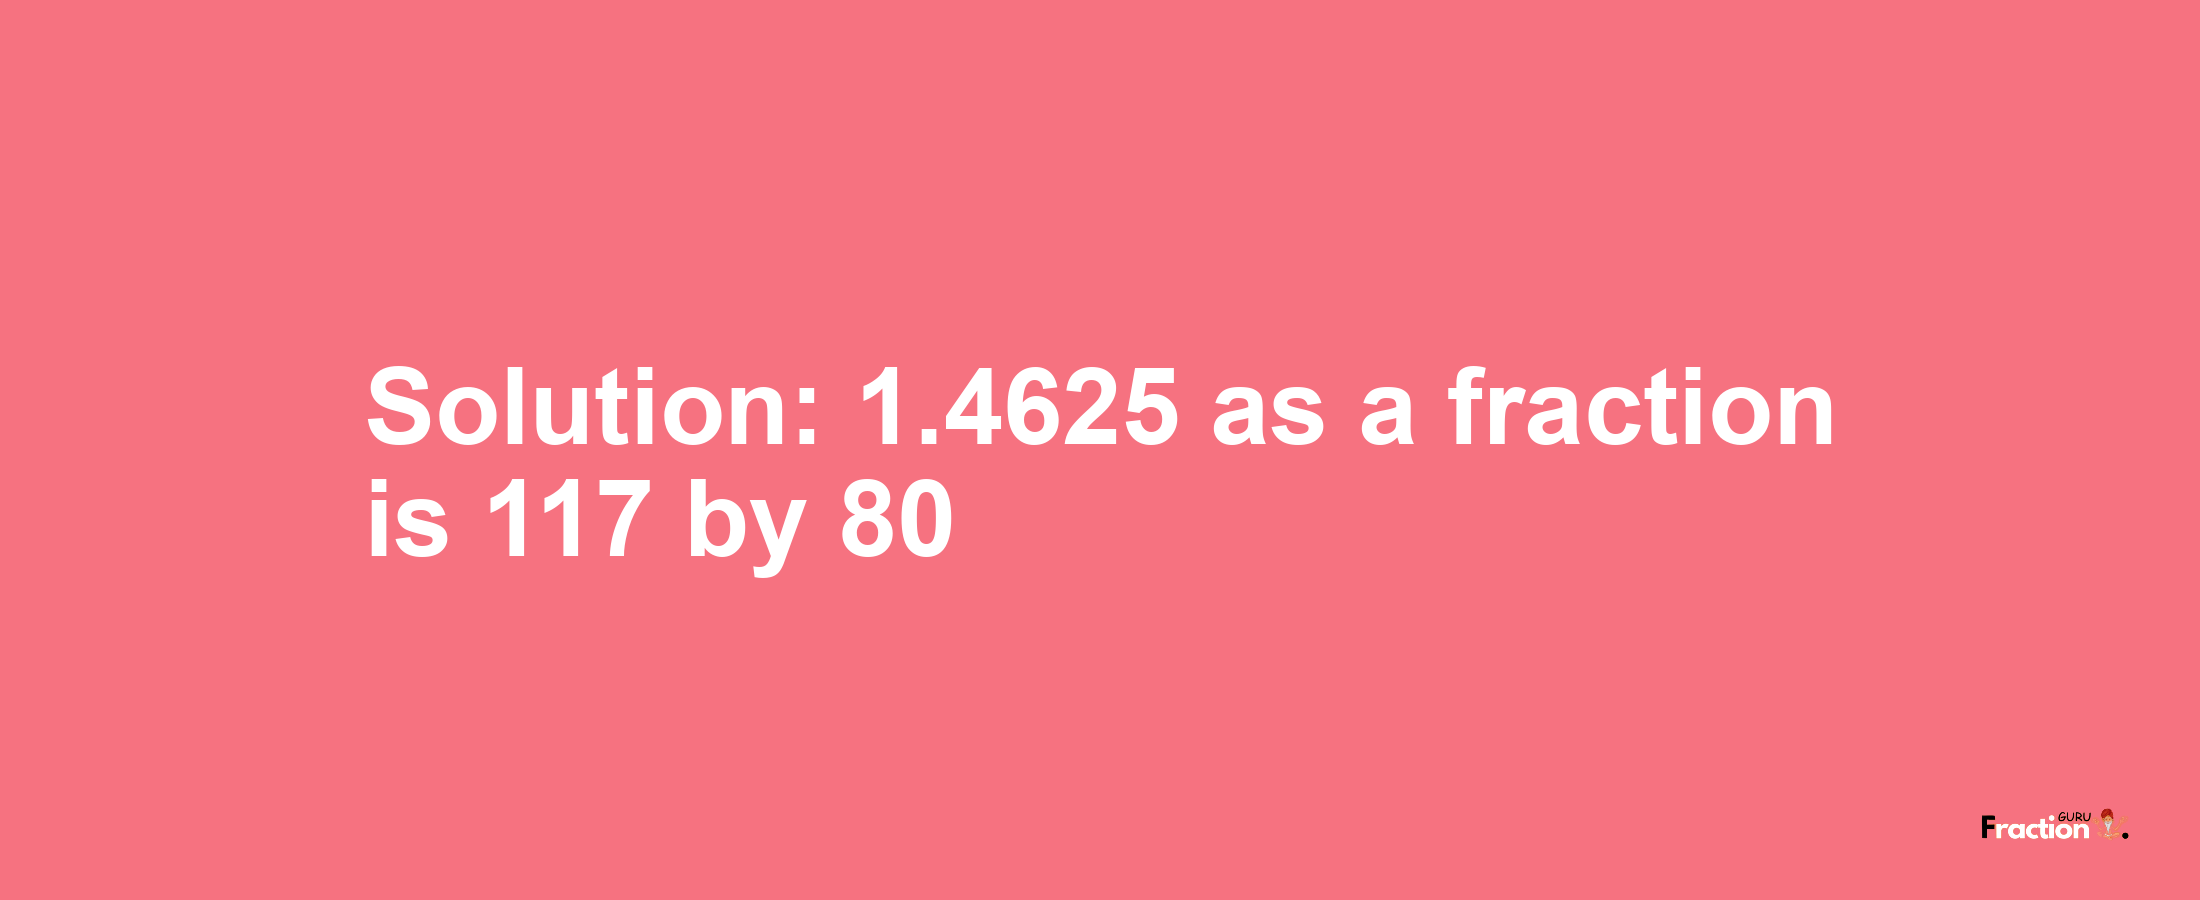 Solution:1.4625 as a fraction is 117/80